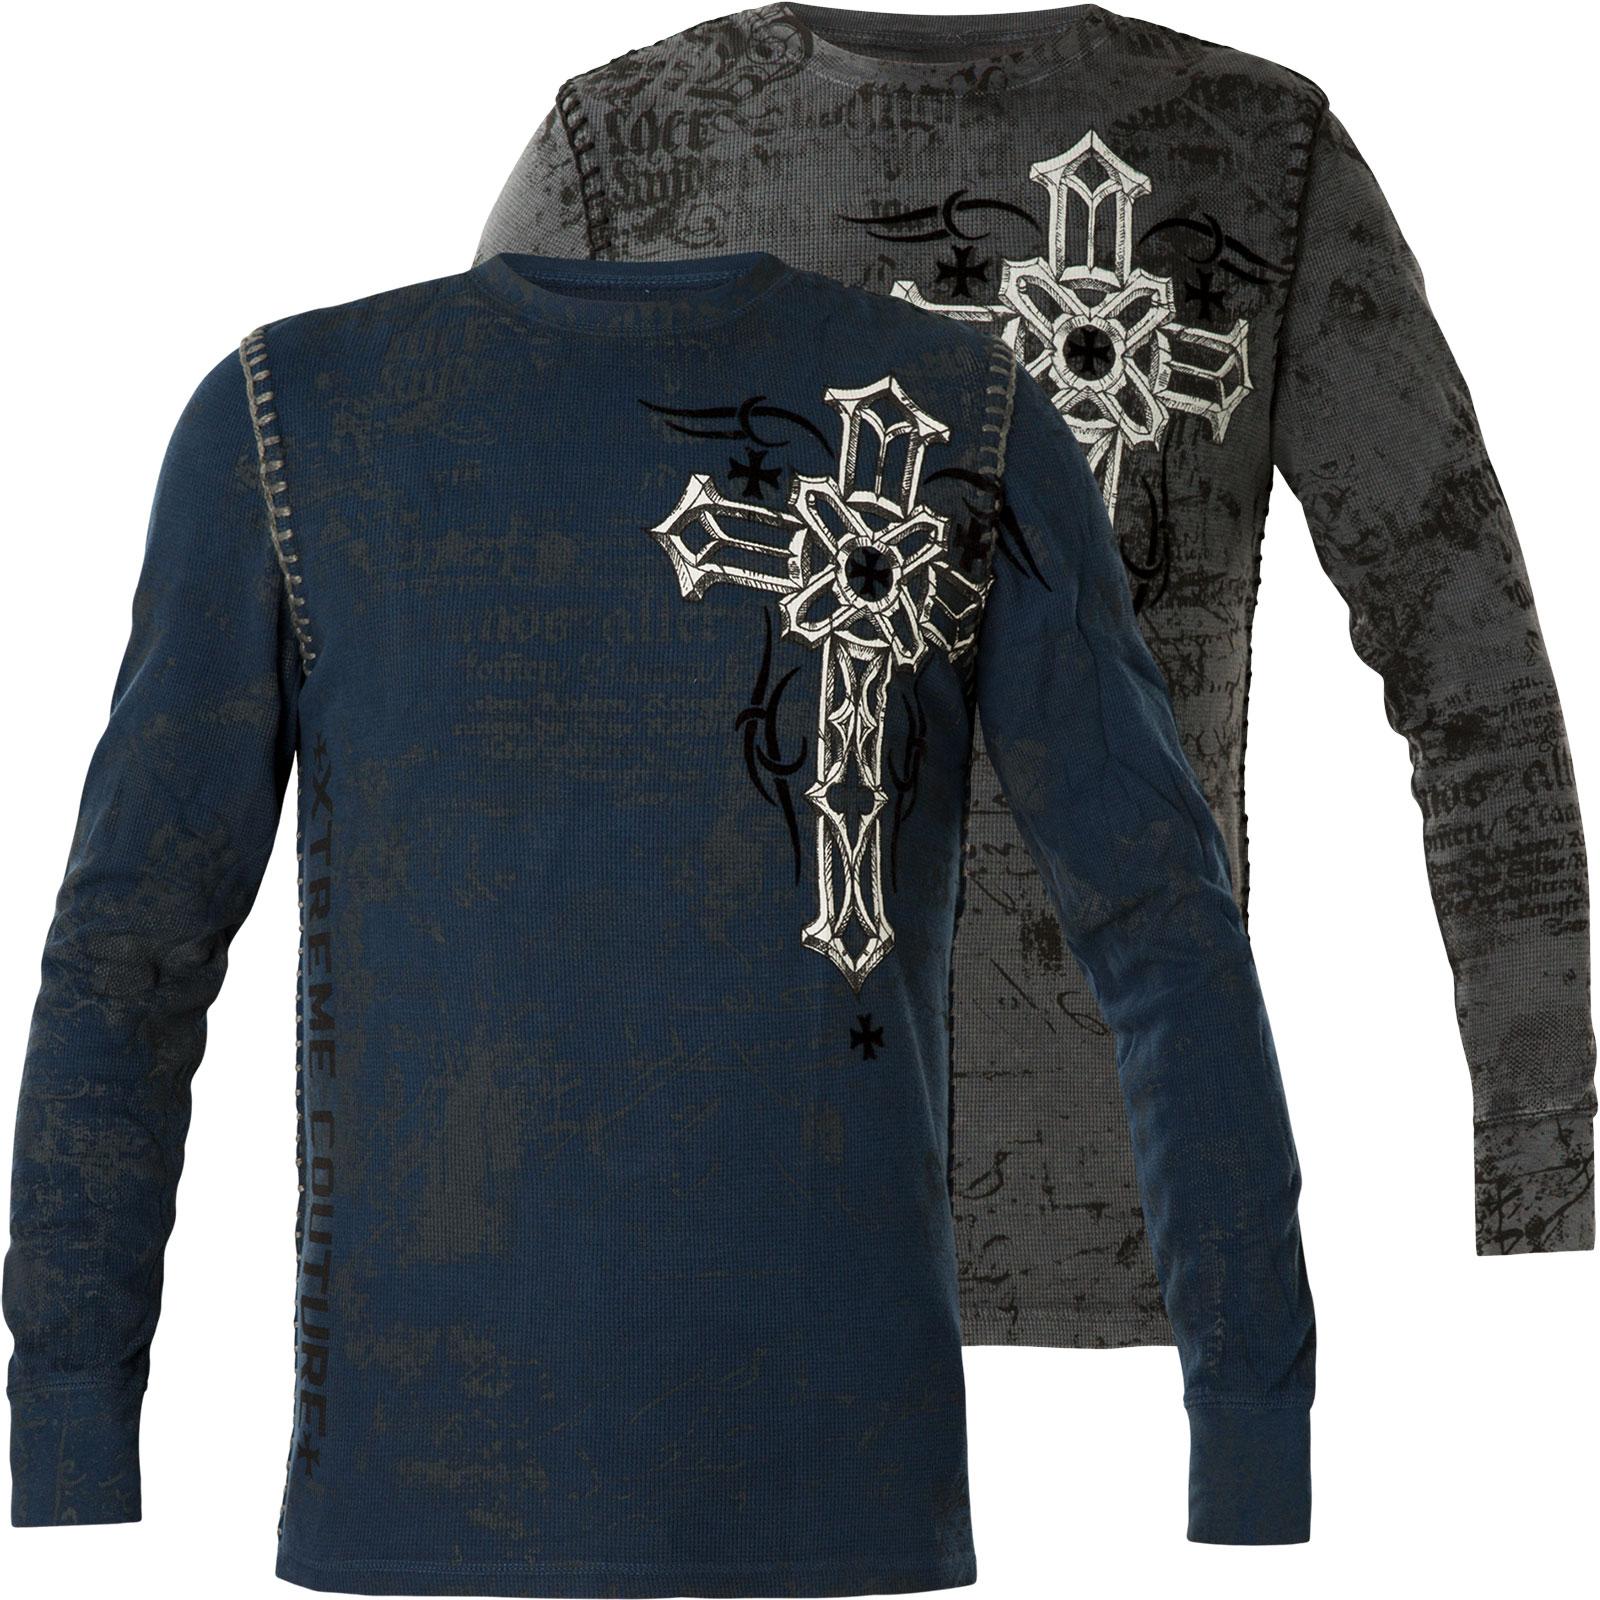 Xtreme Couture by Affliction Thermal Darker Side print with a cross and ...